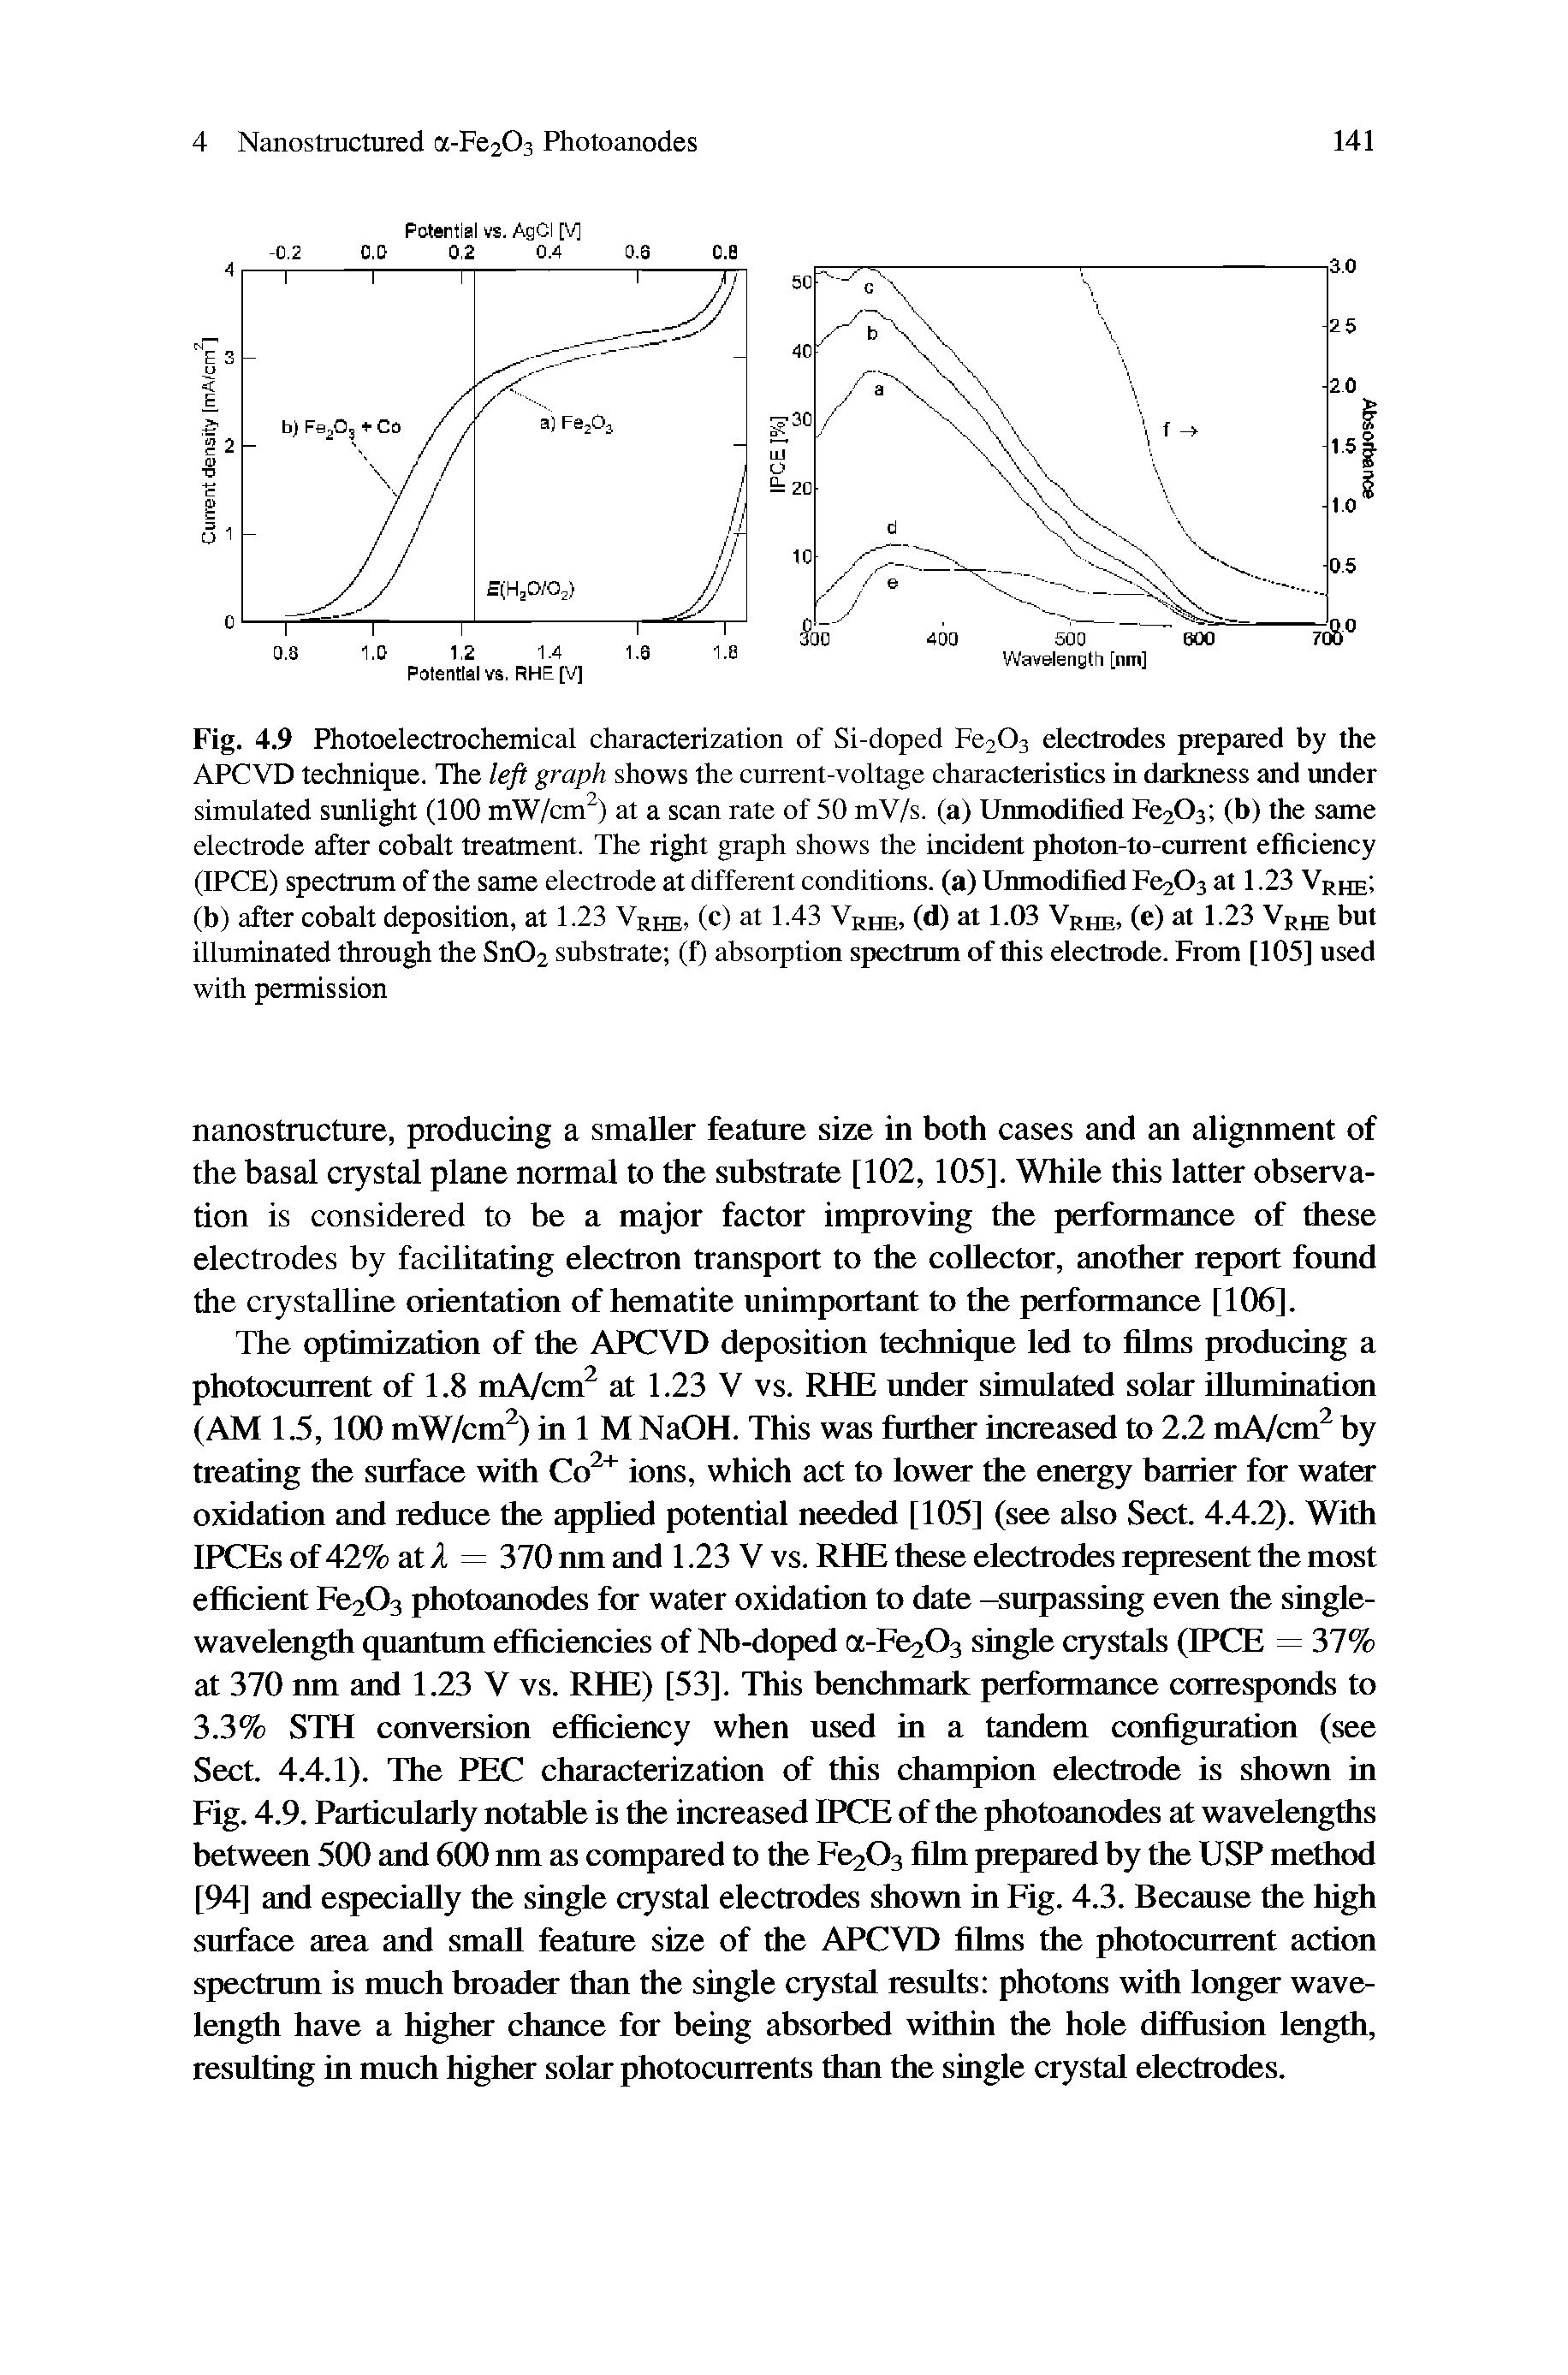 Fig. 4.9 Photoelectrochemical characterization of Si-doped Fc203 electrodes prepared by the APCVD technique. The left graph shows the current-voltage characteristics in darkness and under simulated sunlight (100 mW/cm ) at a scan rate of 50 mV/s. (a) Unmodified Fe203 (b) the same electrode after cobalt treatment. The right graph shows the incident photon-to-current efficiency (IPCE) spectrum of the same electrode at different conditions, (a) Unmodified Fc203 at 1.23 Yrhe (b) after cobalt deposition, at 1.23 Vrhe> (c) at 1.43 Vrhe, (d) at 1.03 Vrhe, (e) at 1.23 Vrhe but illuminated through the Sn02 substrate (f) absorption spectrum of this electrode. From [105] used with permission...